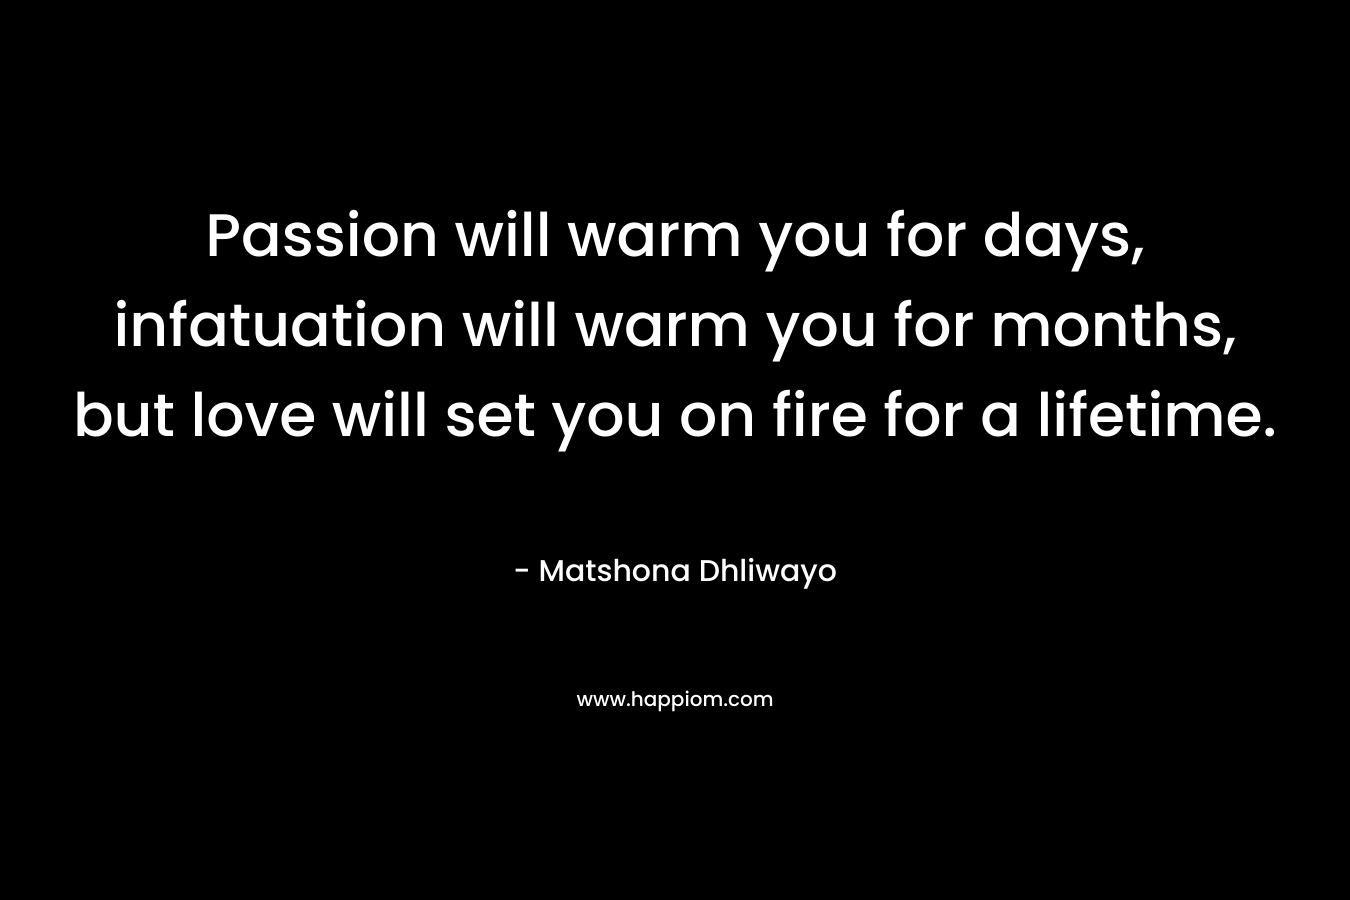 Passion will warm you for days, infatuation will warm you for months, but love will set you on fire for a lifetime.